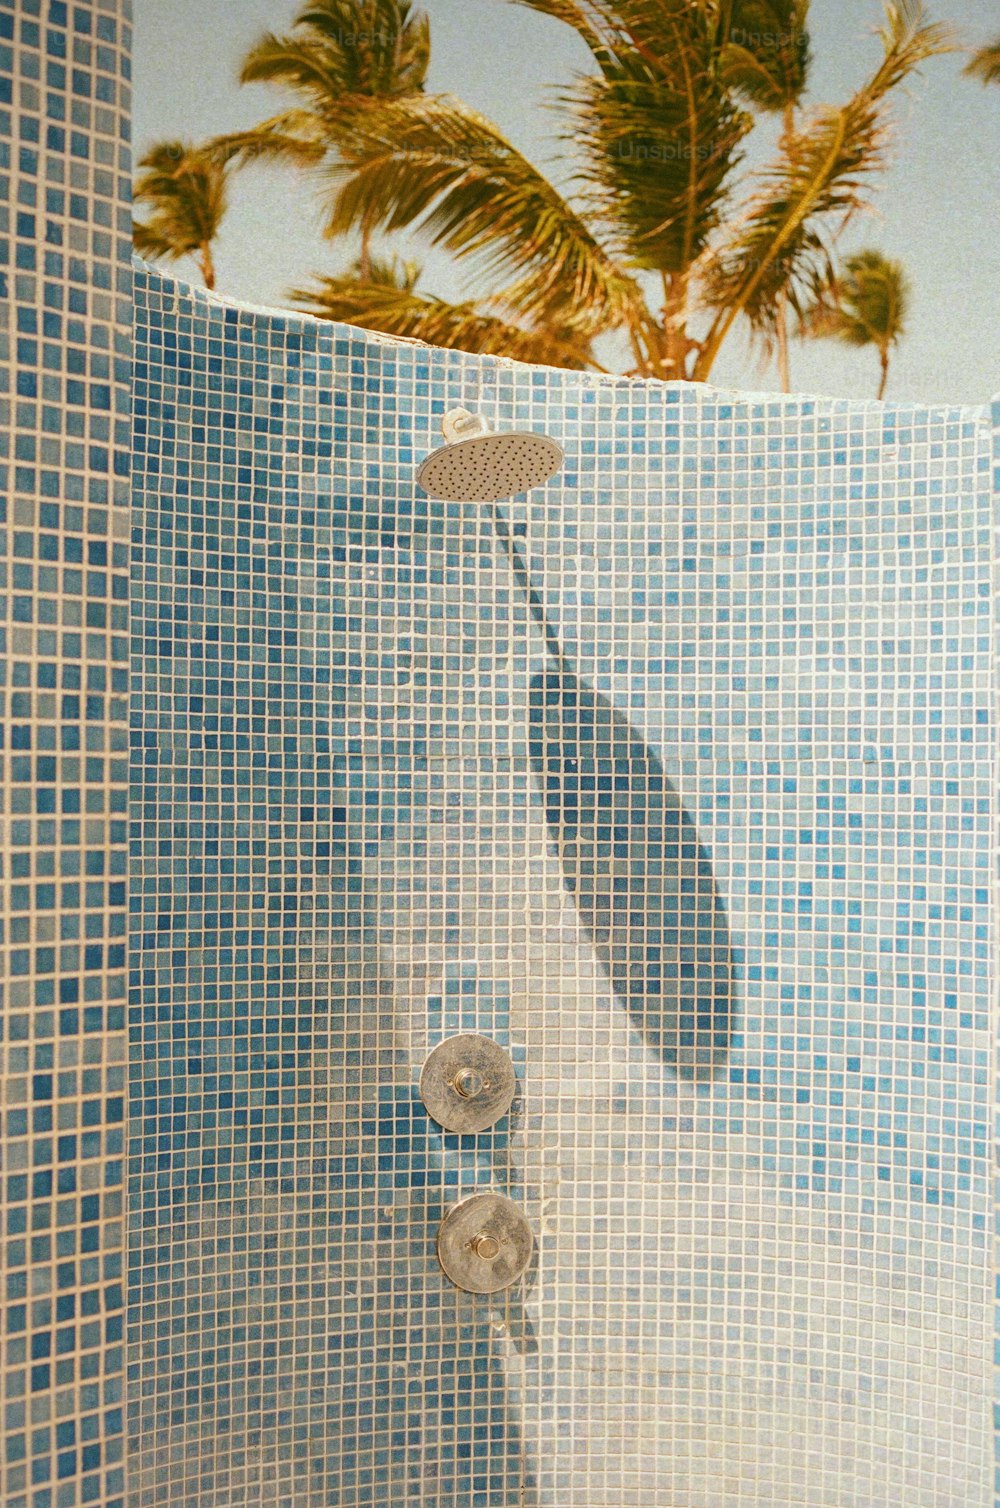 a tiled shower with a palm tree in the background